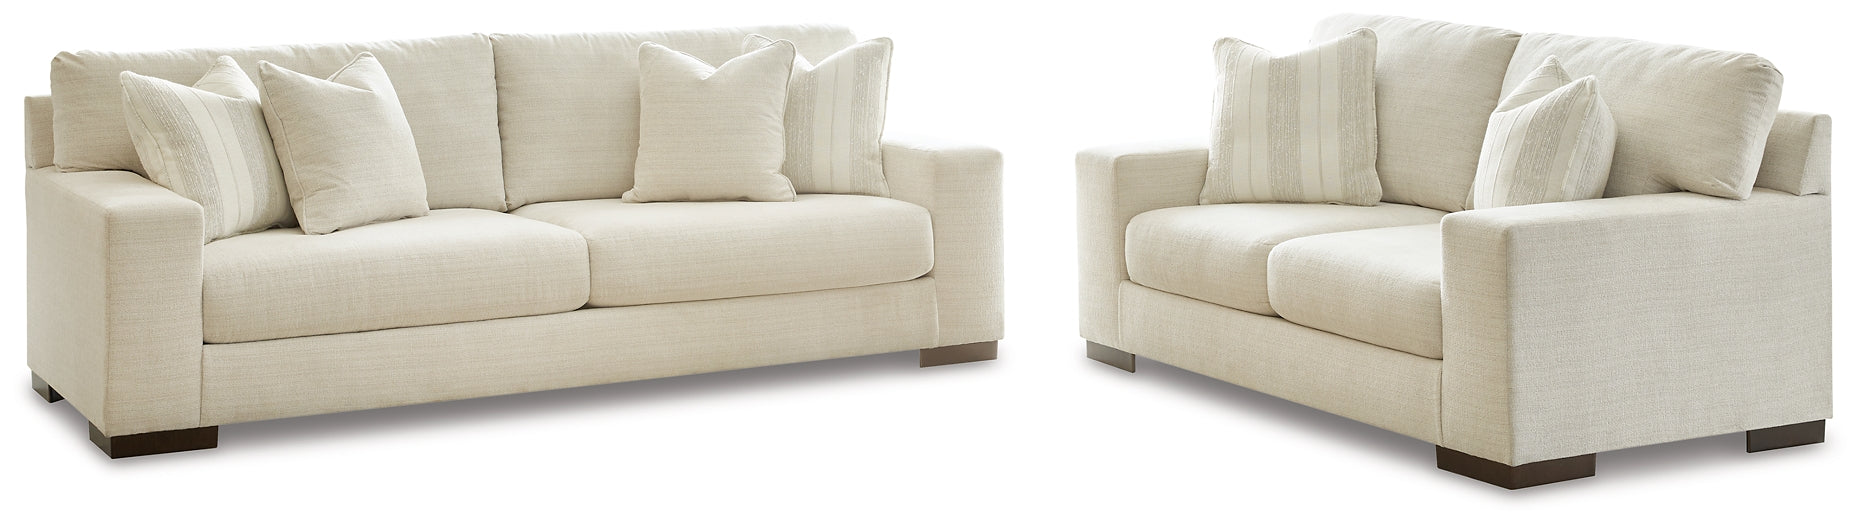 Maggie Sofa and Loveseat at Walker Mattress and Furniture Locations in Cedar Park and Belton TX.